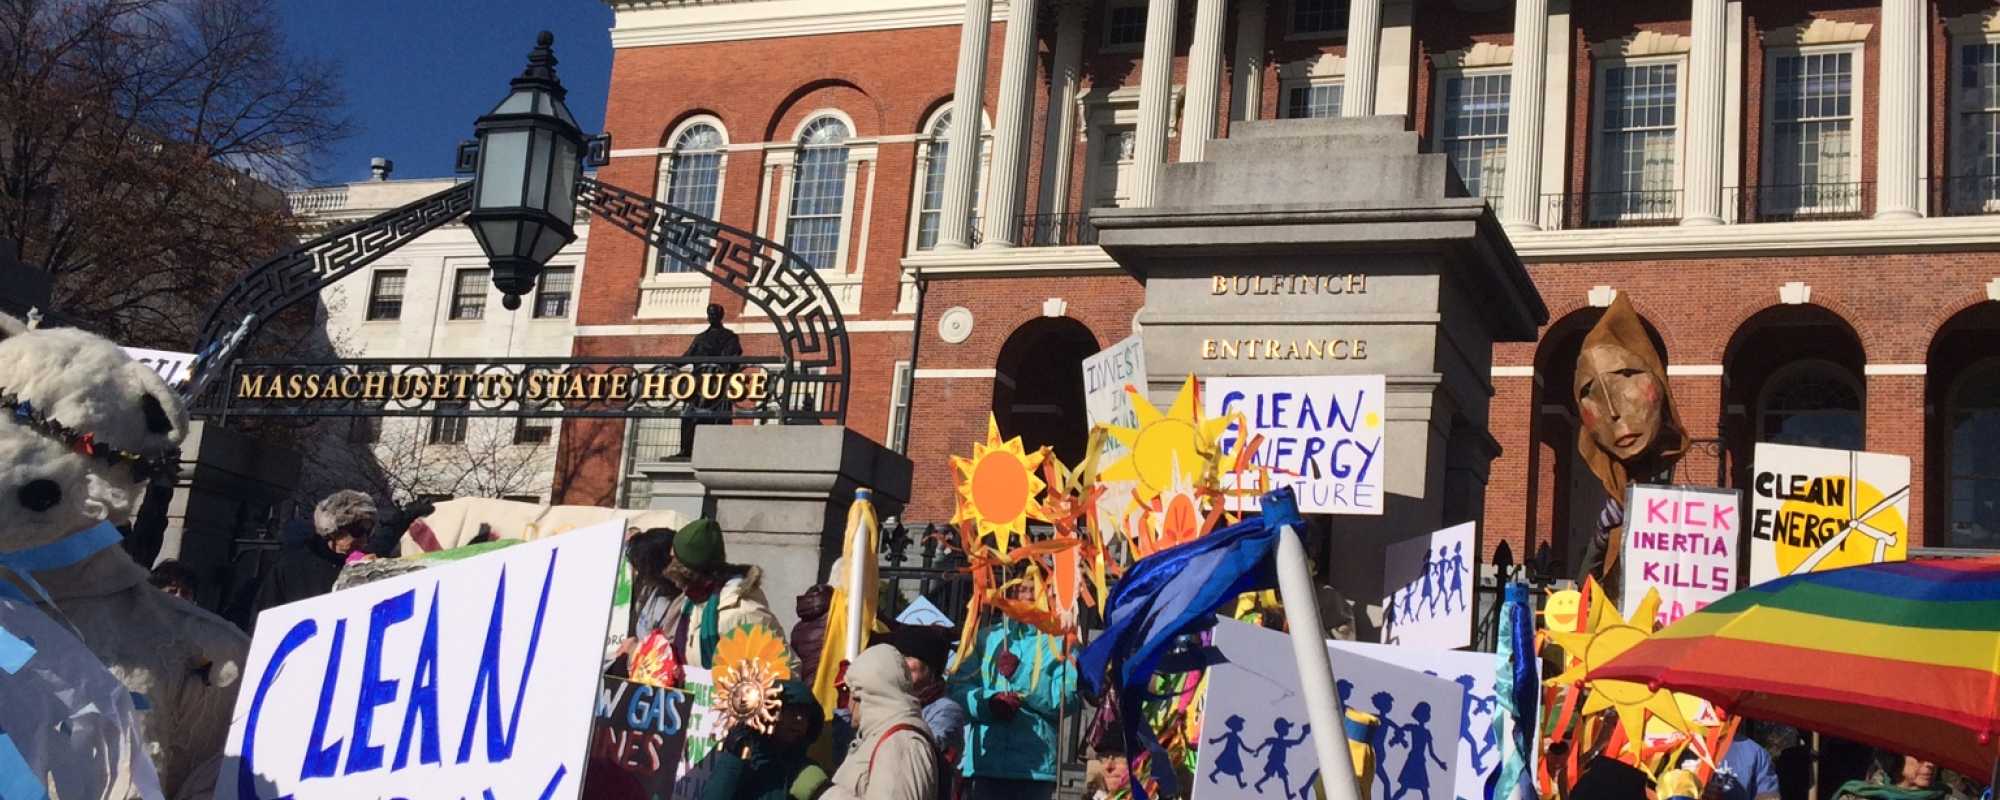 Clean energy protest 